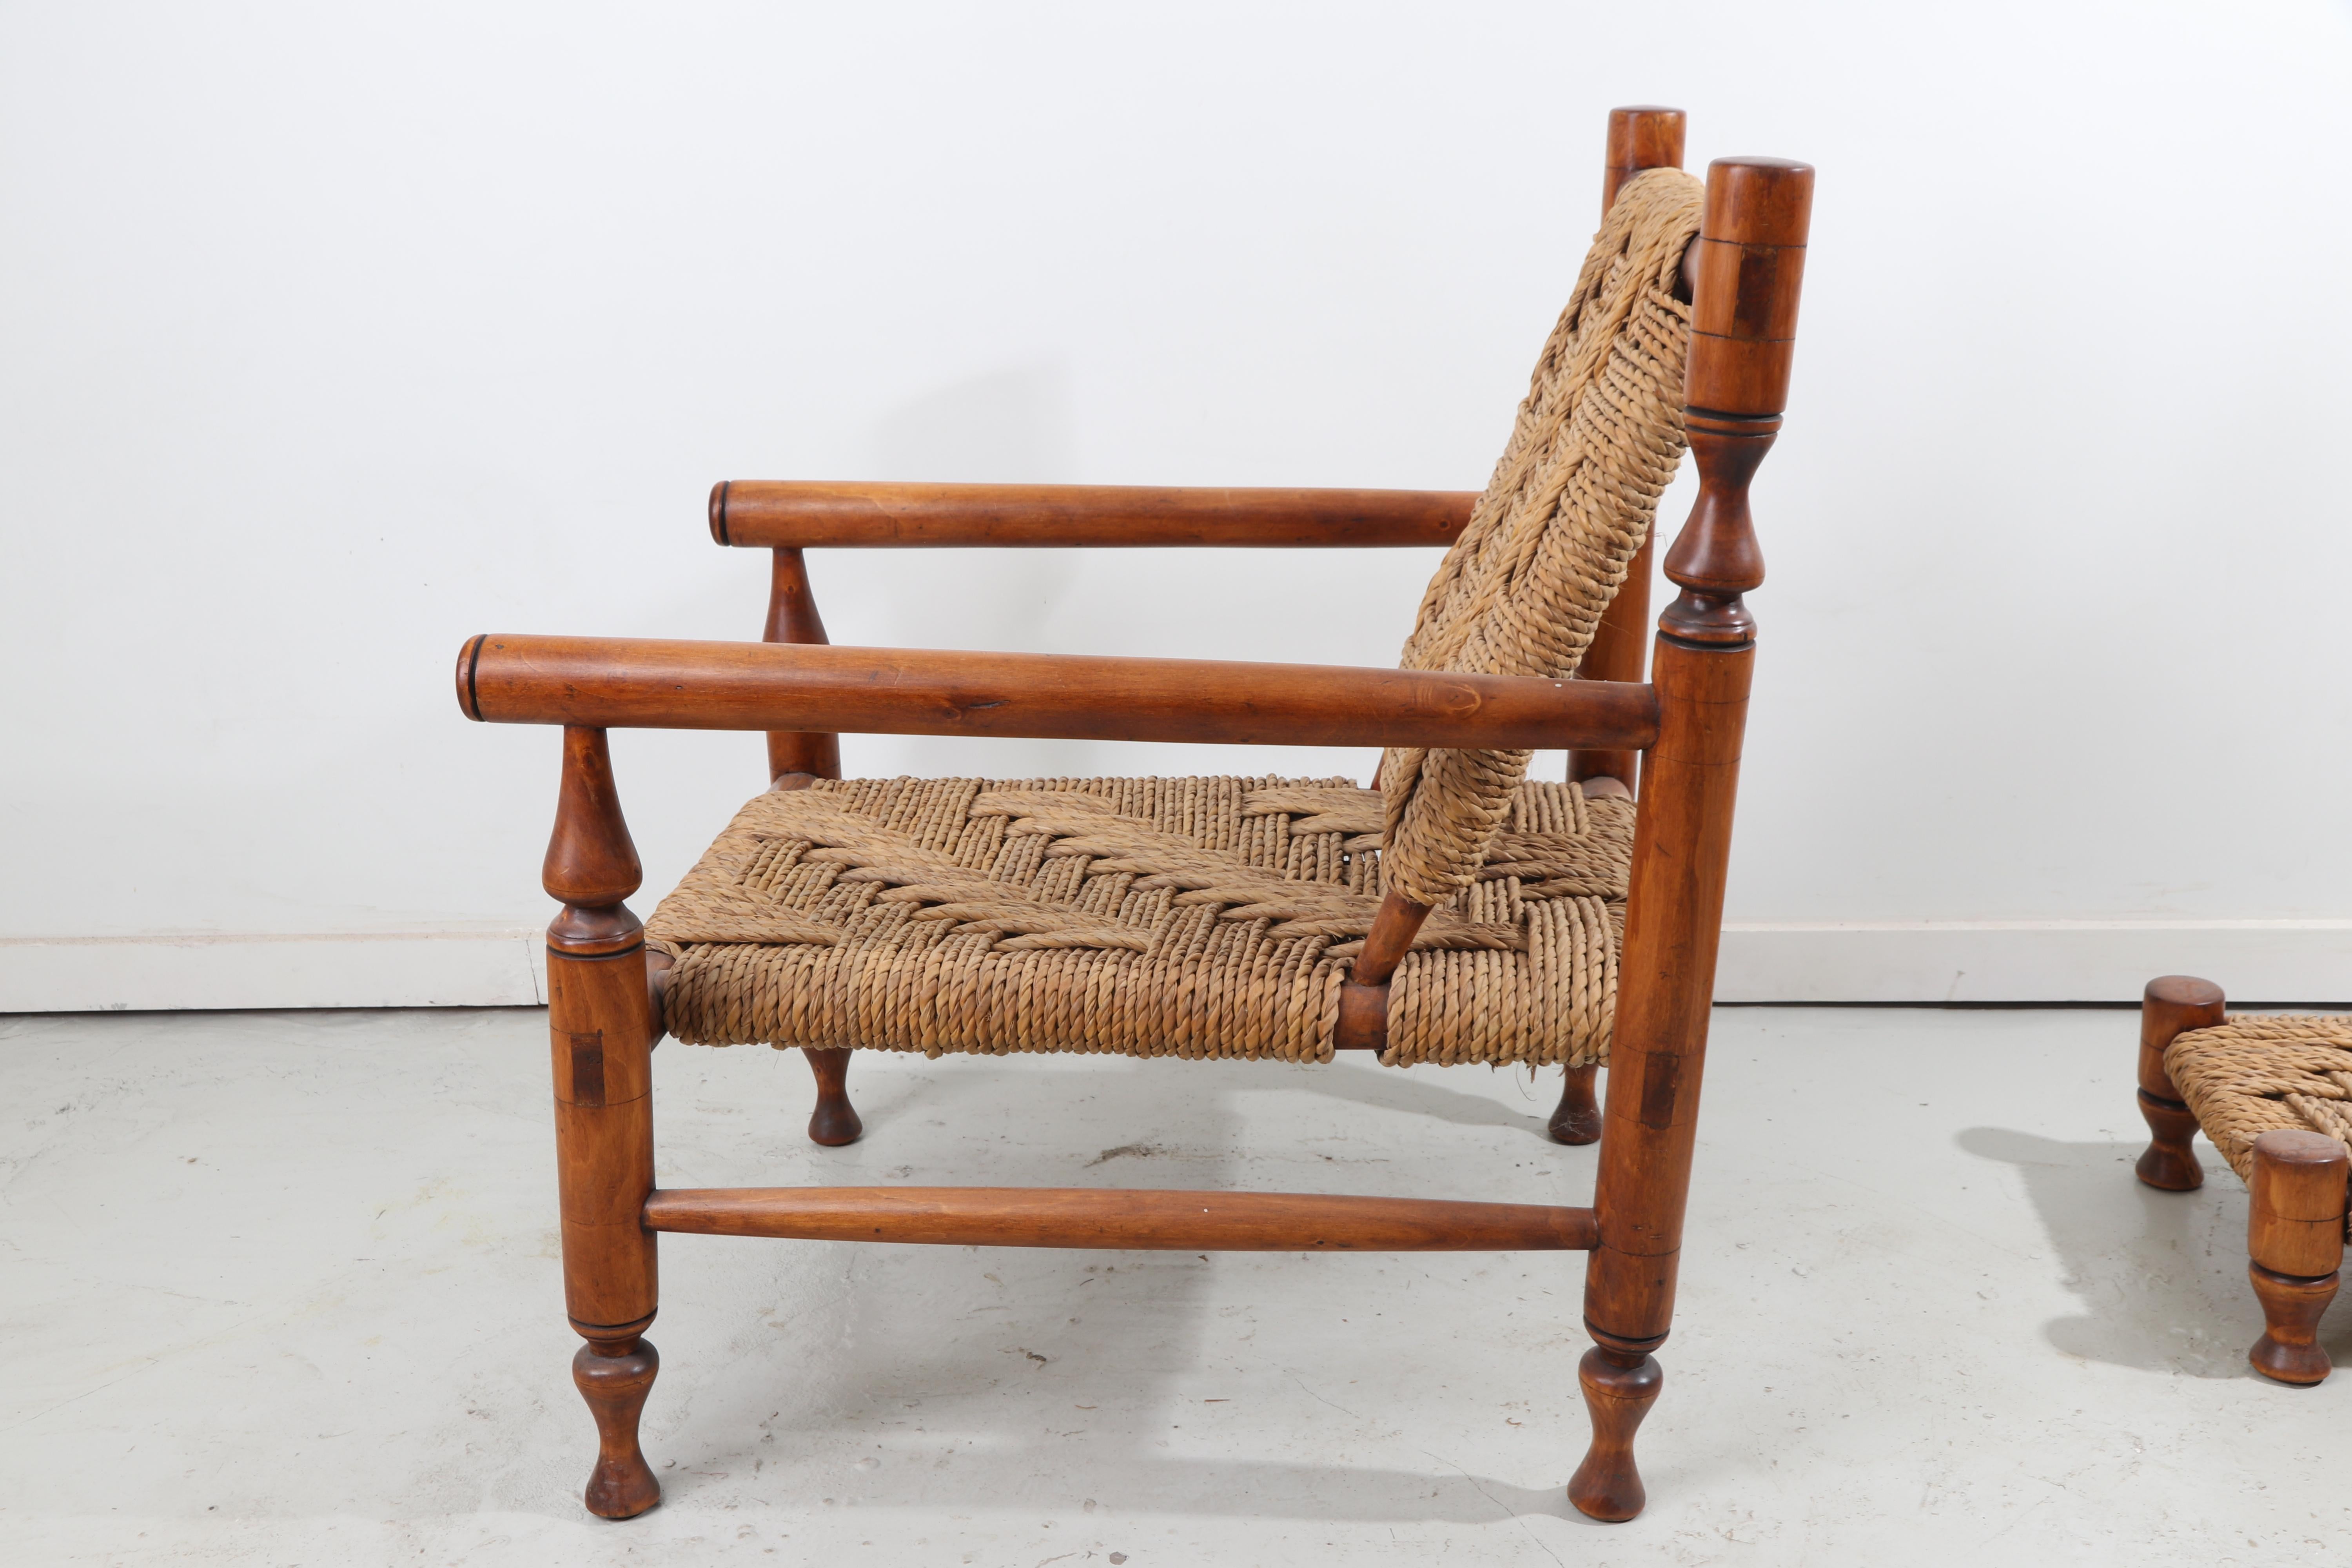 Beautifully crafted easy chair in the manner of Charlotte Perriand with a matching pair of foot stools or children's seats. The frame is made of ashwood and the seats and back rests are woven sisal rope. The chairs have a beautiful patina, are very